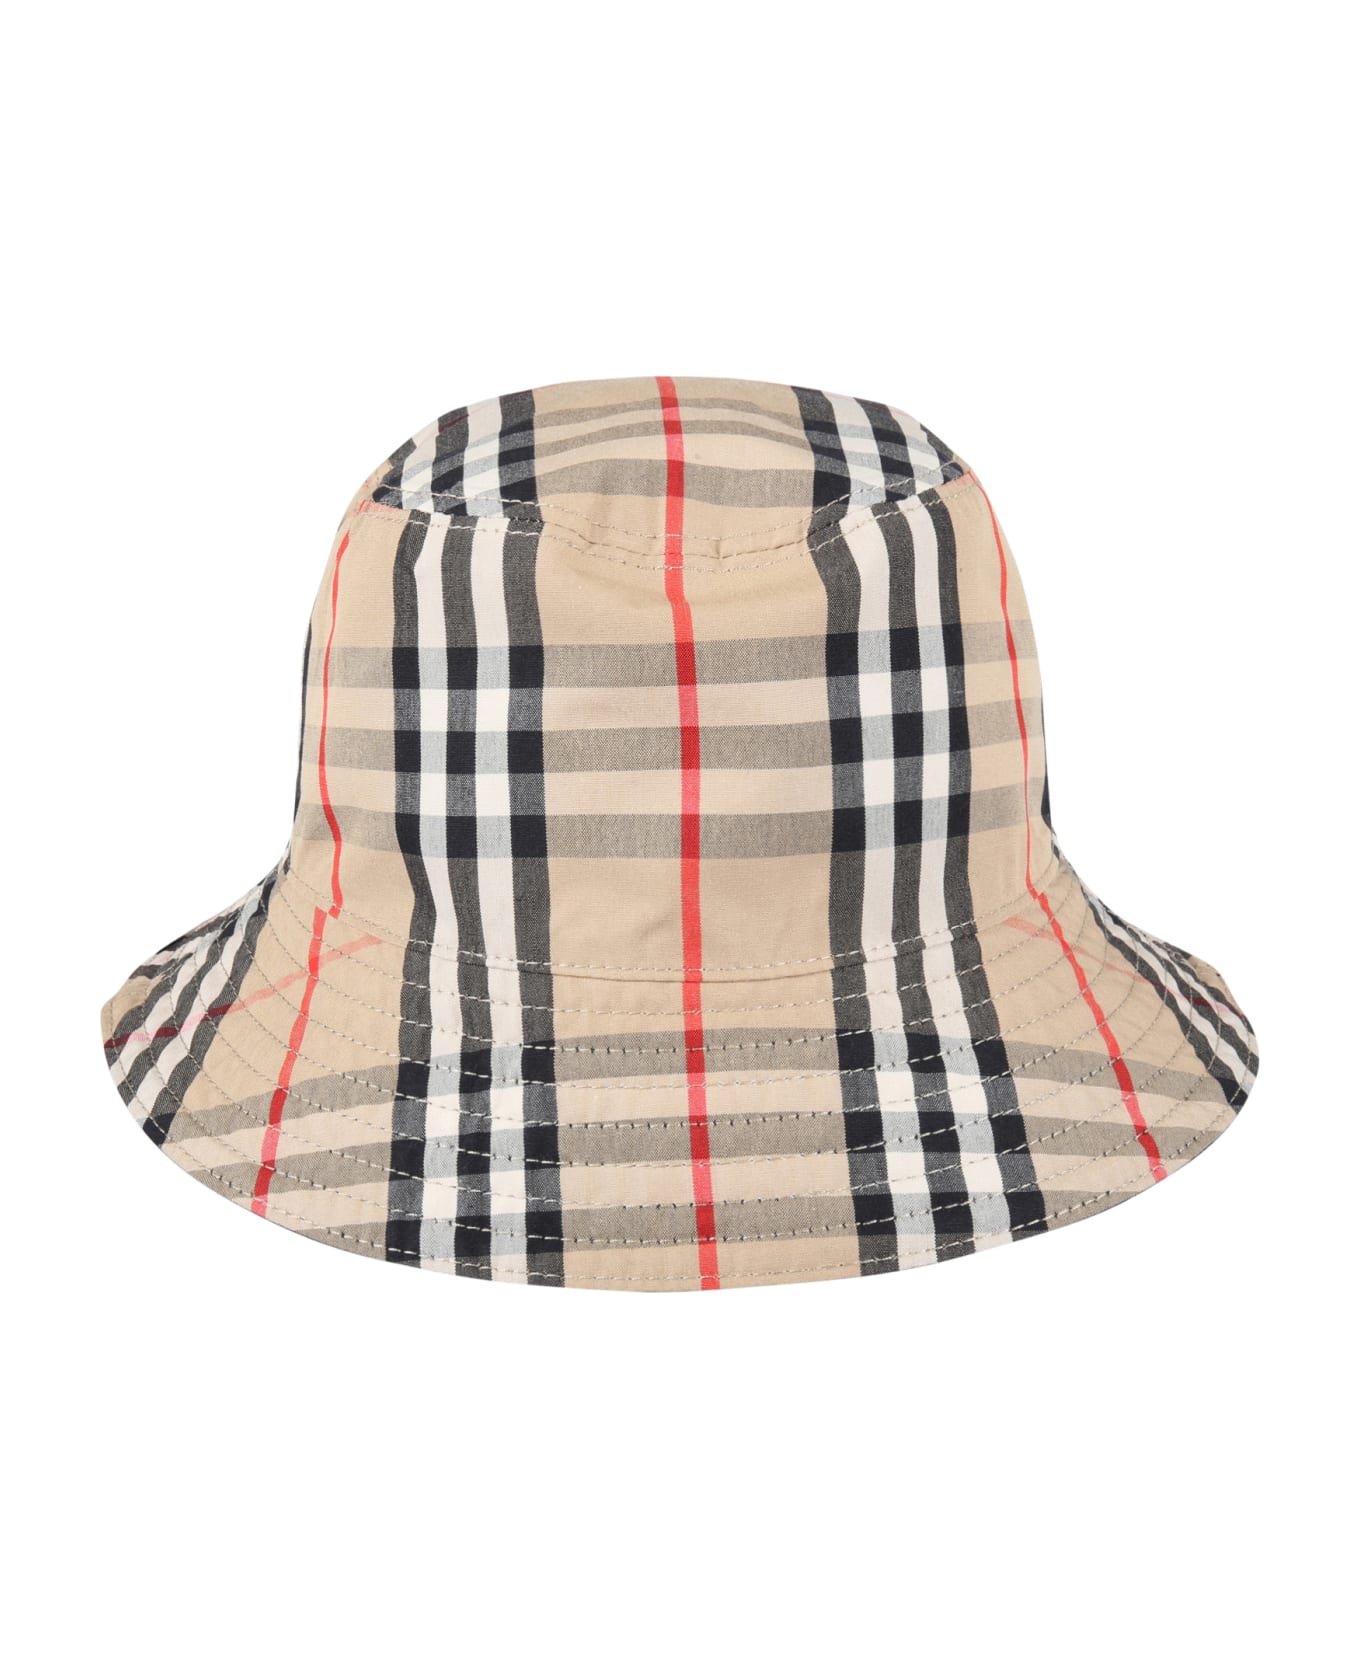 Burberry Reversible Cloche For Kids - Blue